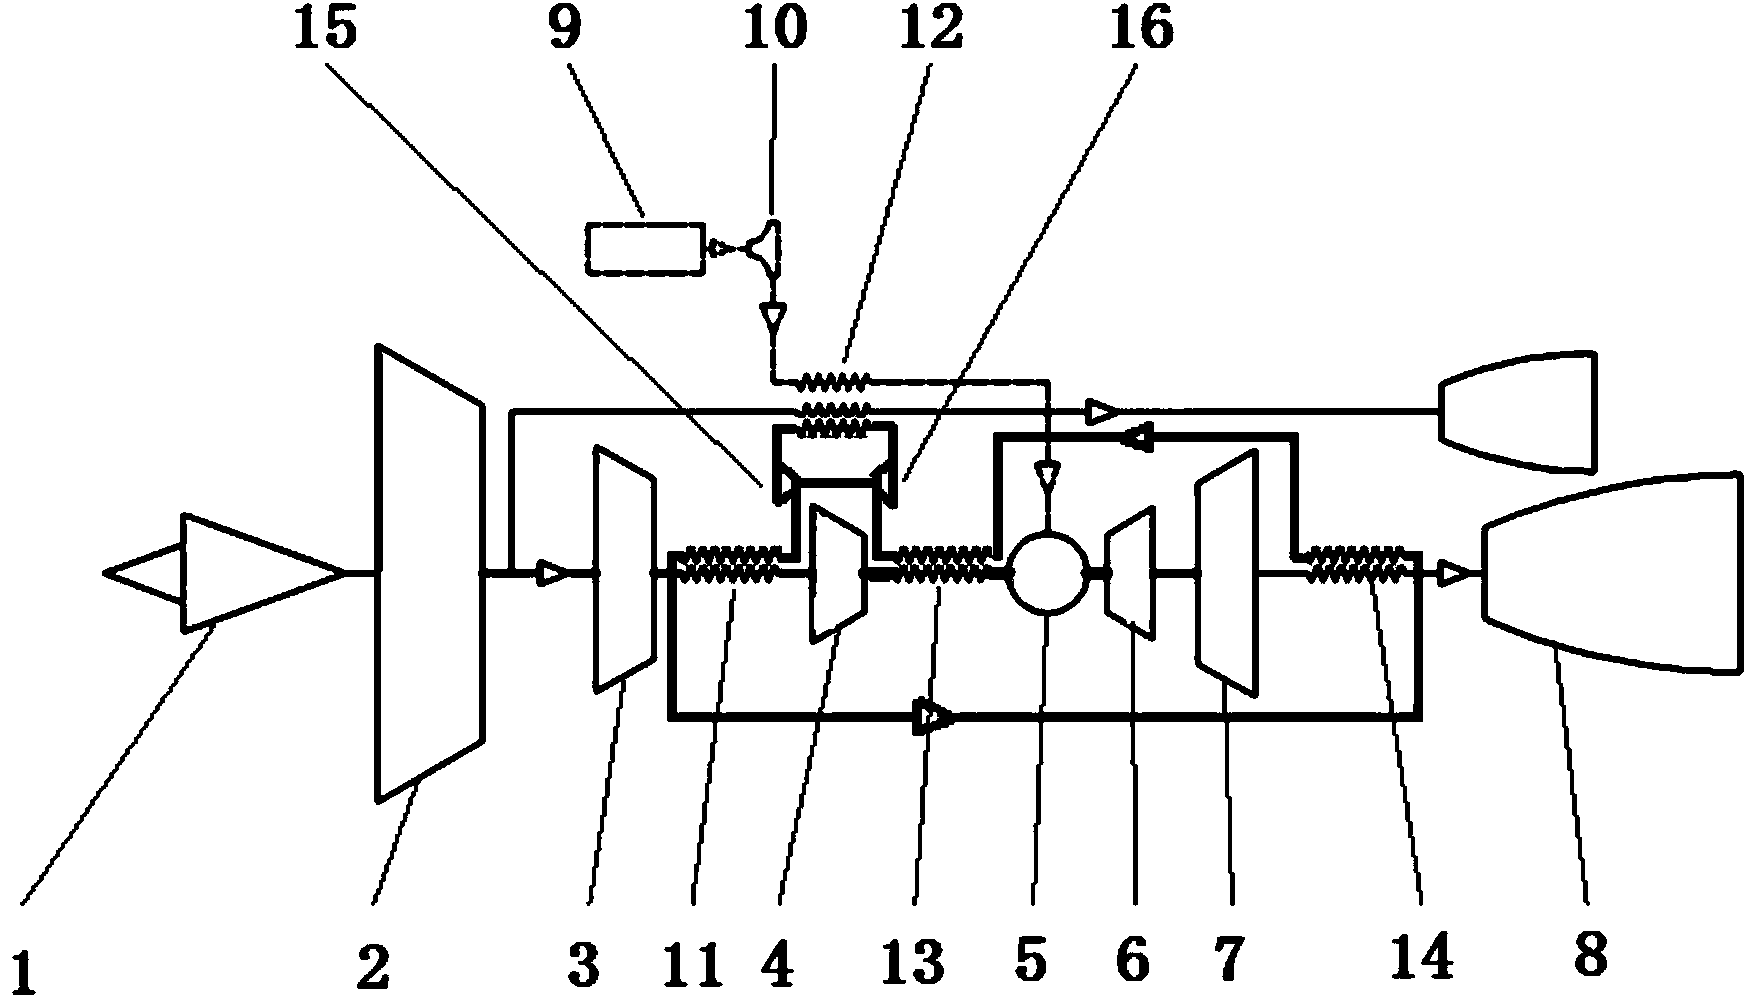 Intercooling or intercooling recuperating layout for aero-engine